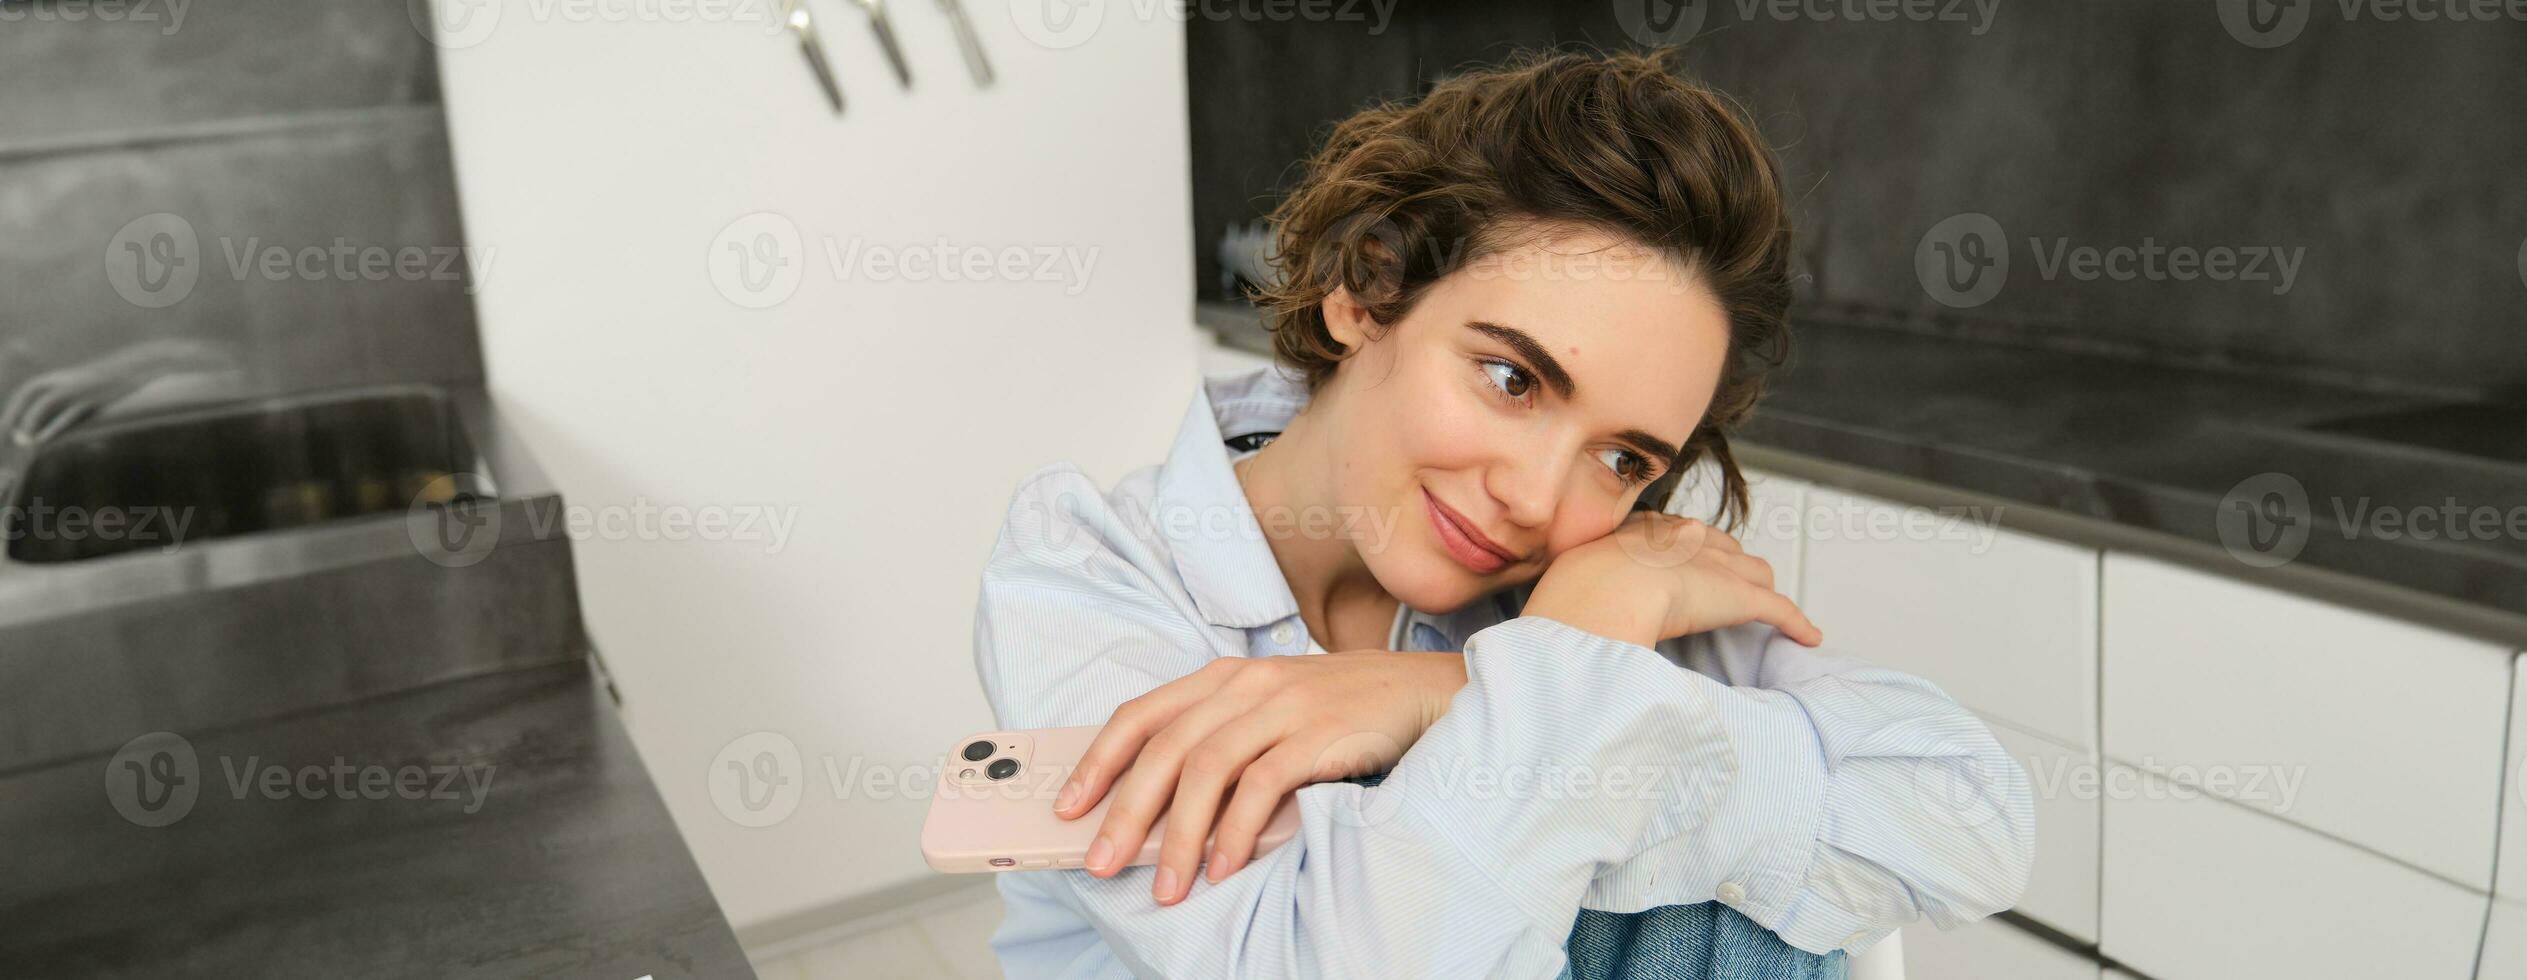 Close up portrait of dreamy, beautiful woman thinking of something happy, holding smartphone, waiting for a message or phone call, spending time at home photo